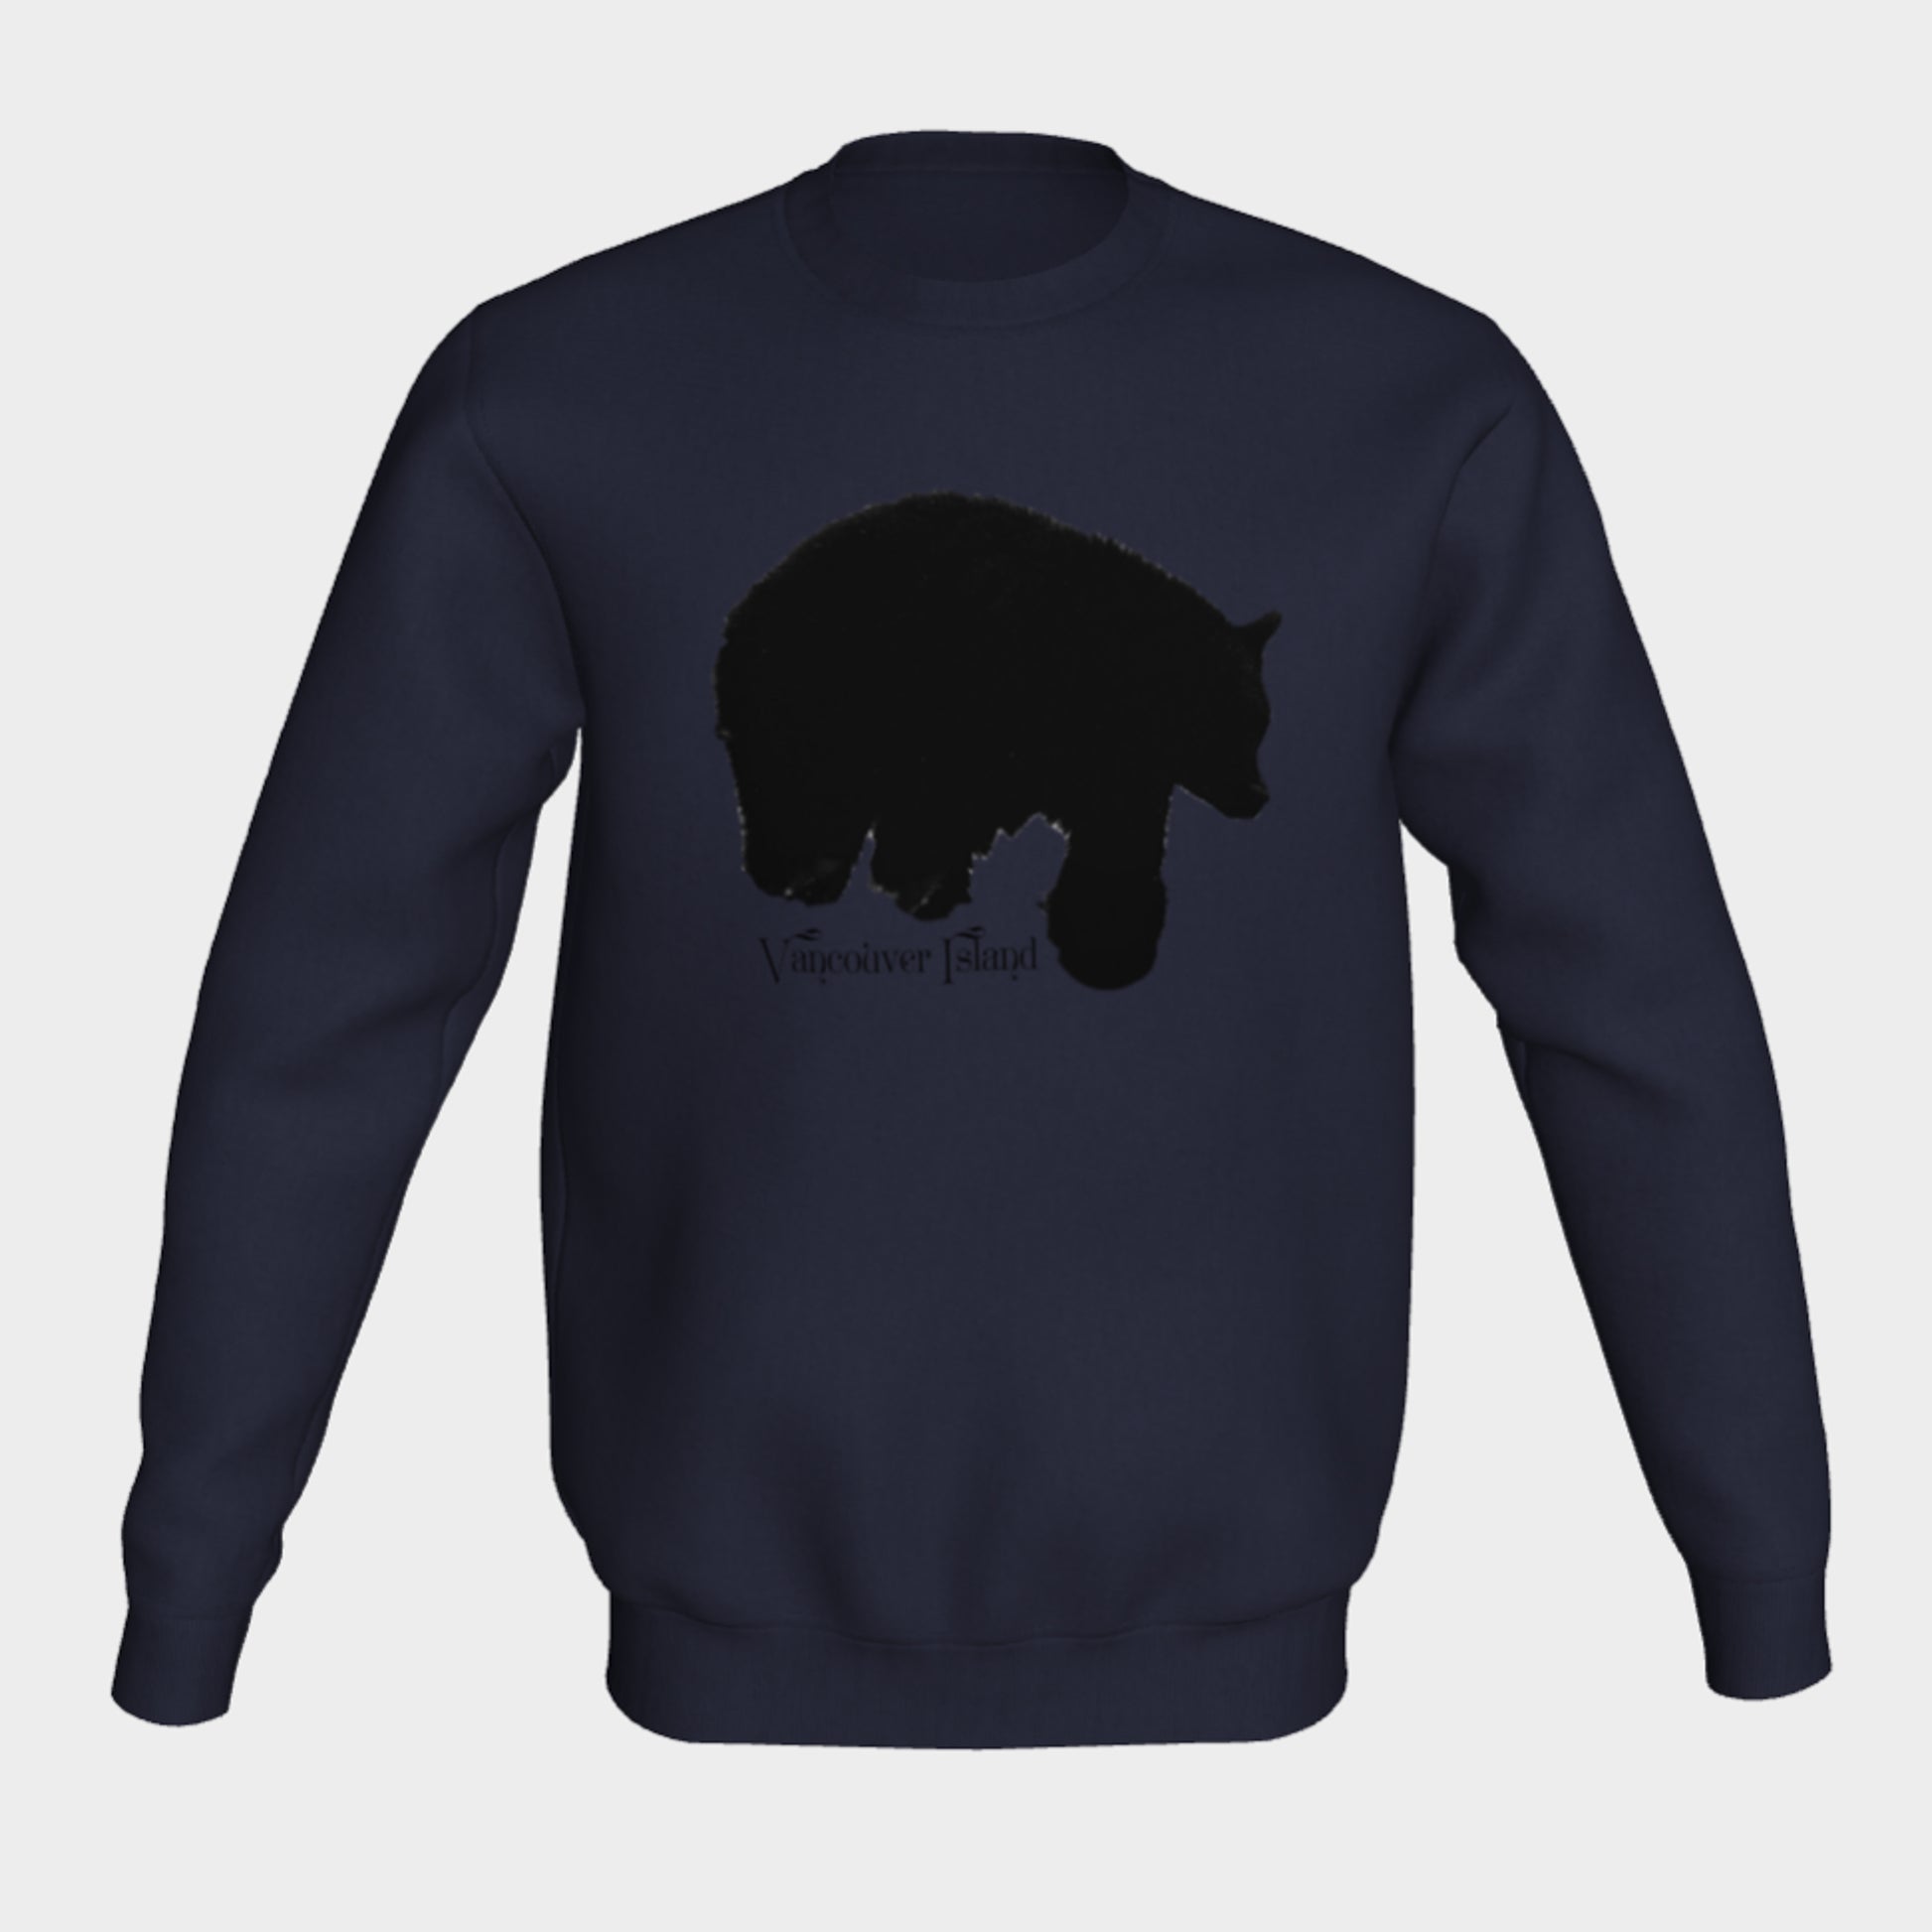 What’s better than a super cozy sweatshirt? A super cozy sweatshirt from Van Isle Goddess!  Super cozy unisex sweatshirt for those chilly days.  Excellent for men or women.   Fit is roomy and comfortable. 